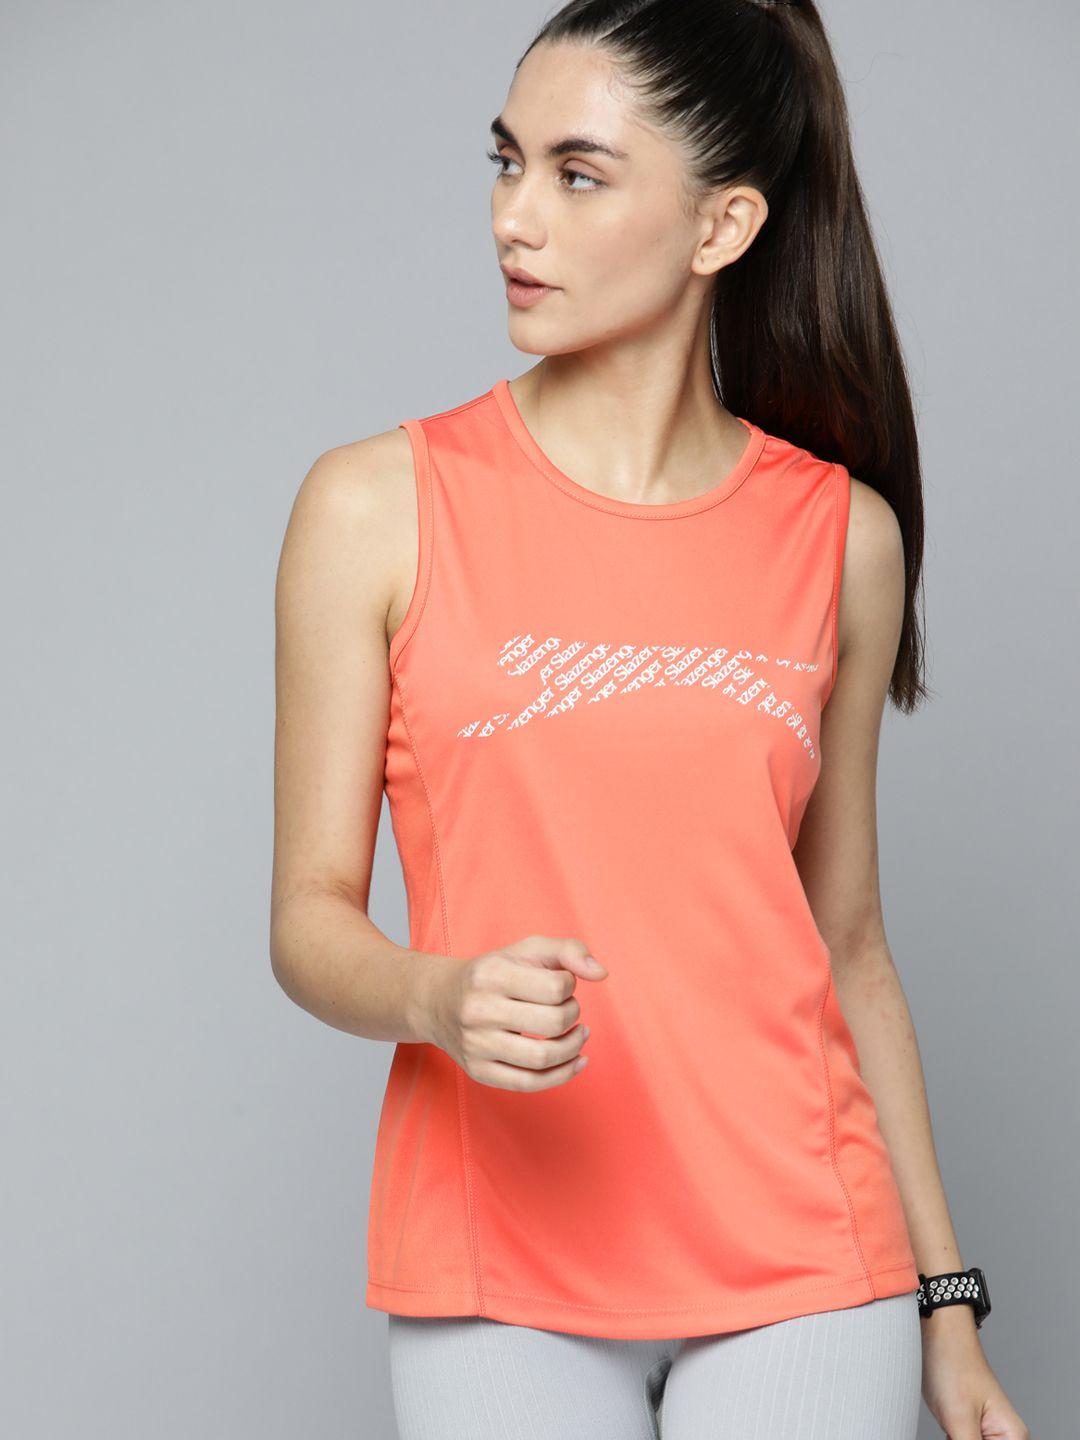 slazenger women coral orange printed anti-microbial running t-shirt with reflective detail